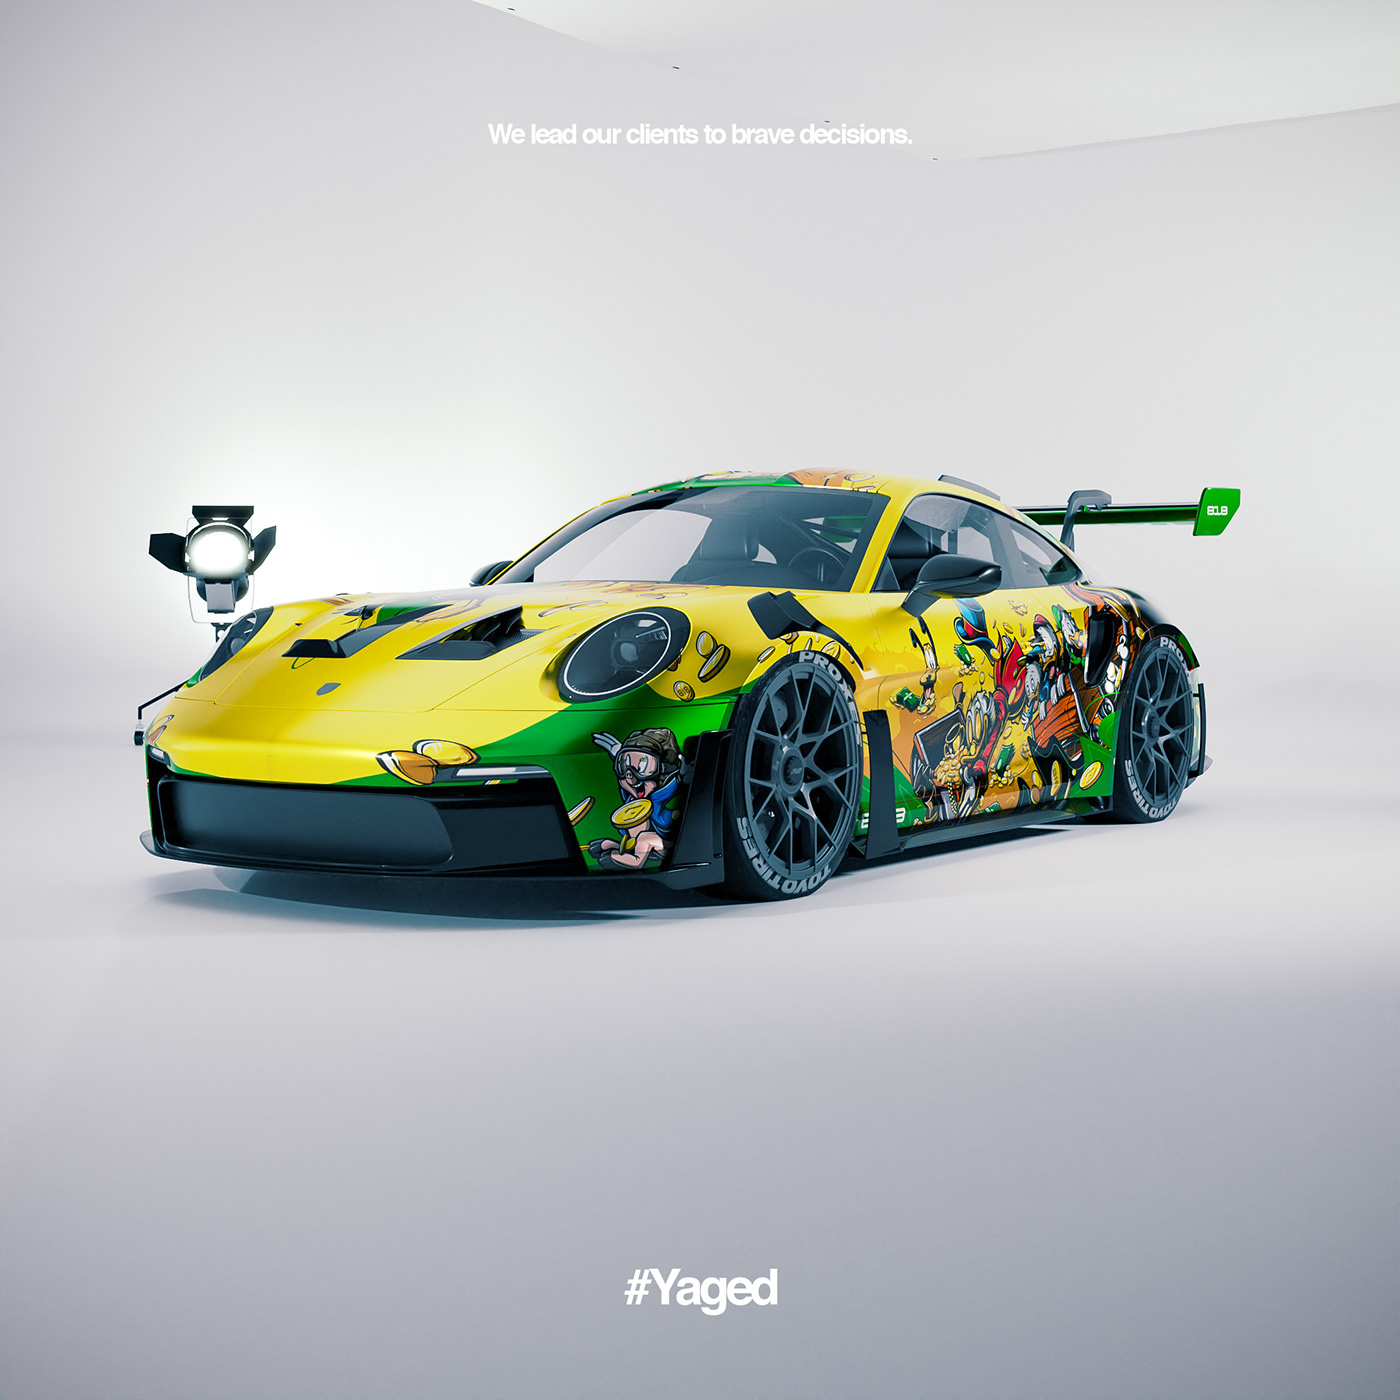 Porsche 911 Porsche Yaged carwrapping carwrapdesign looney tunes characters vinylwrap yagodesign.eu